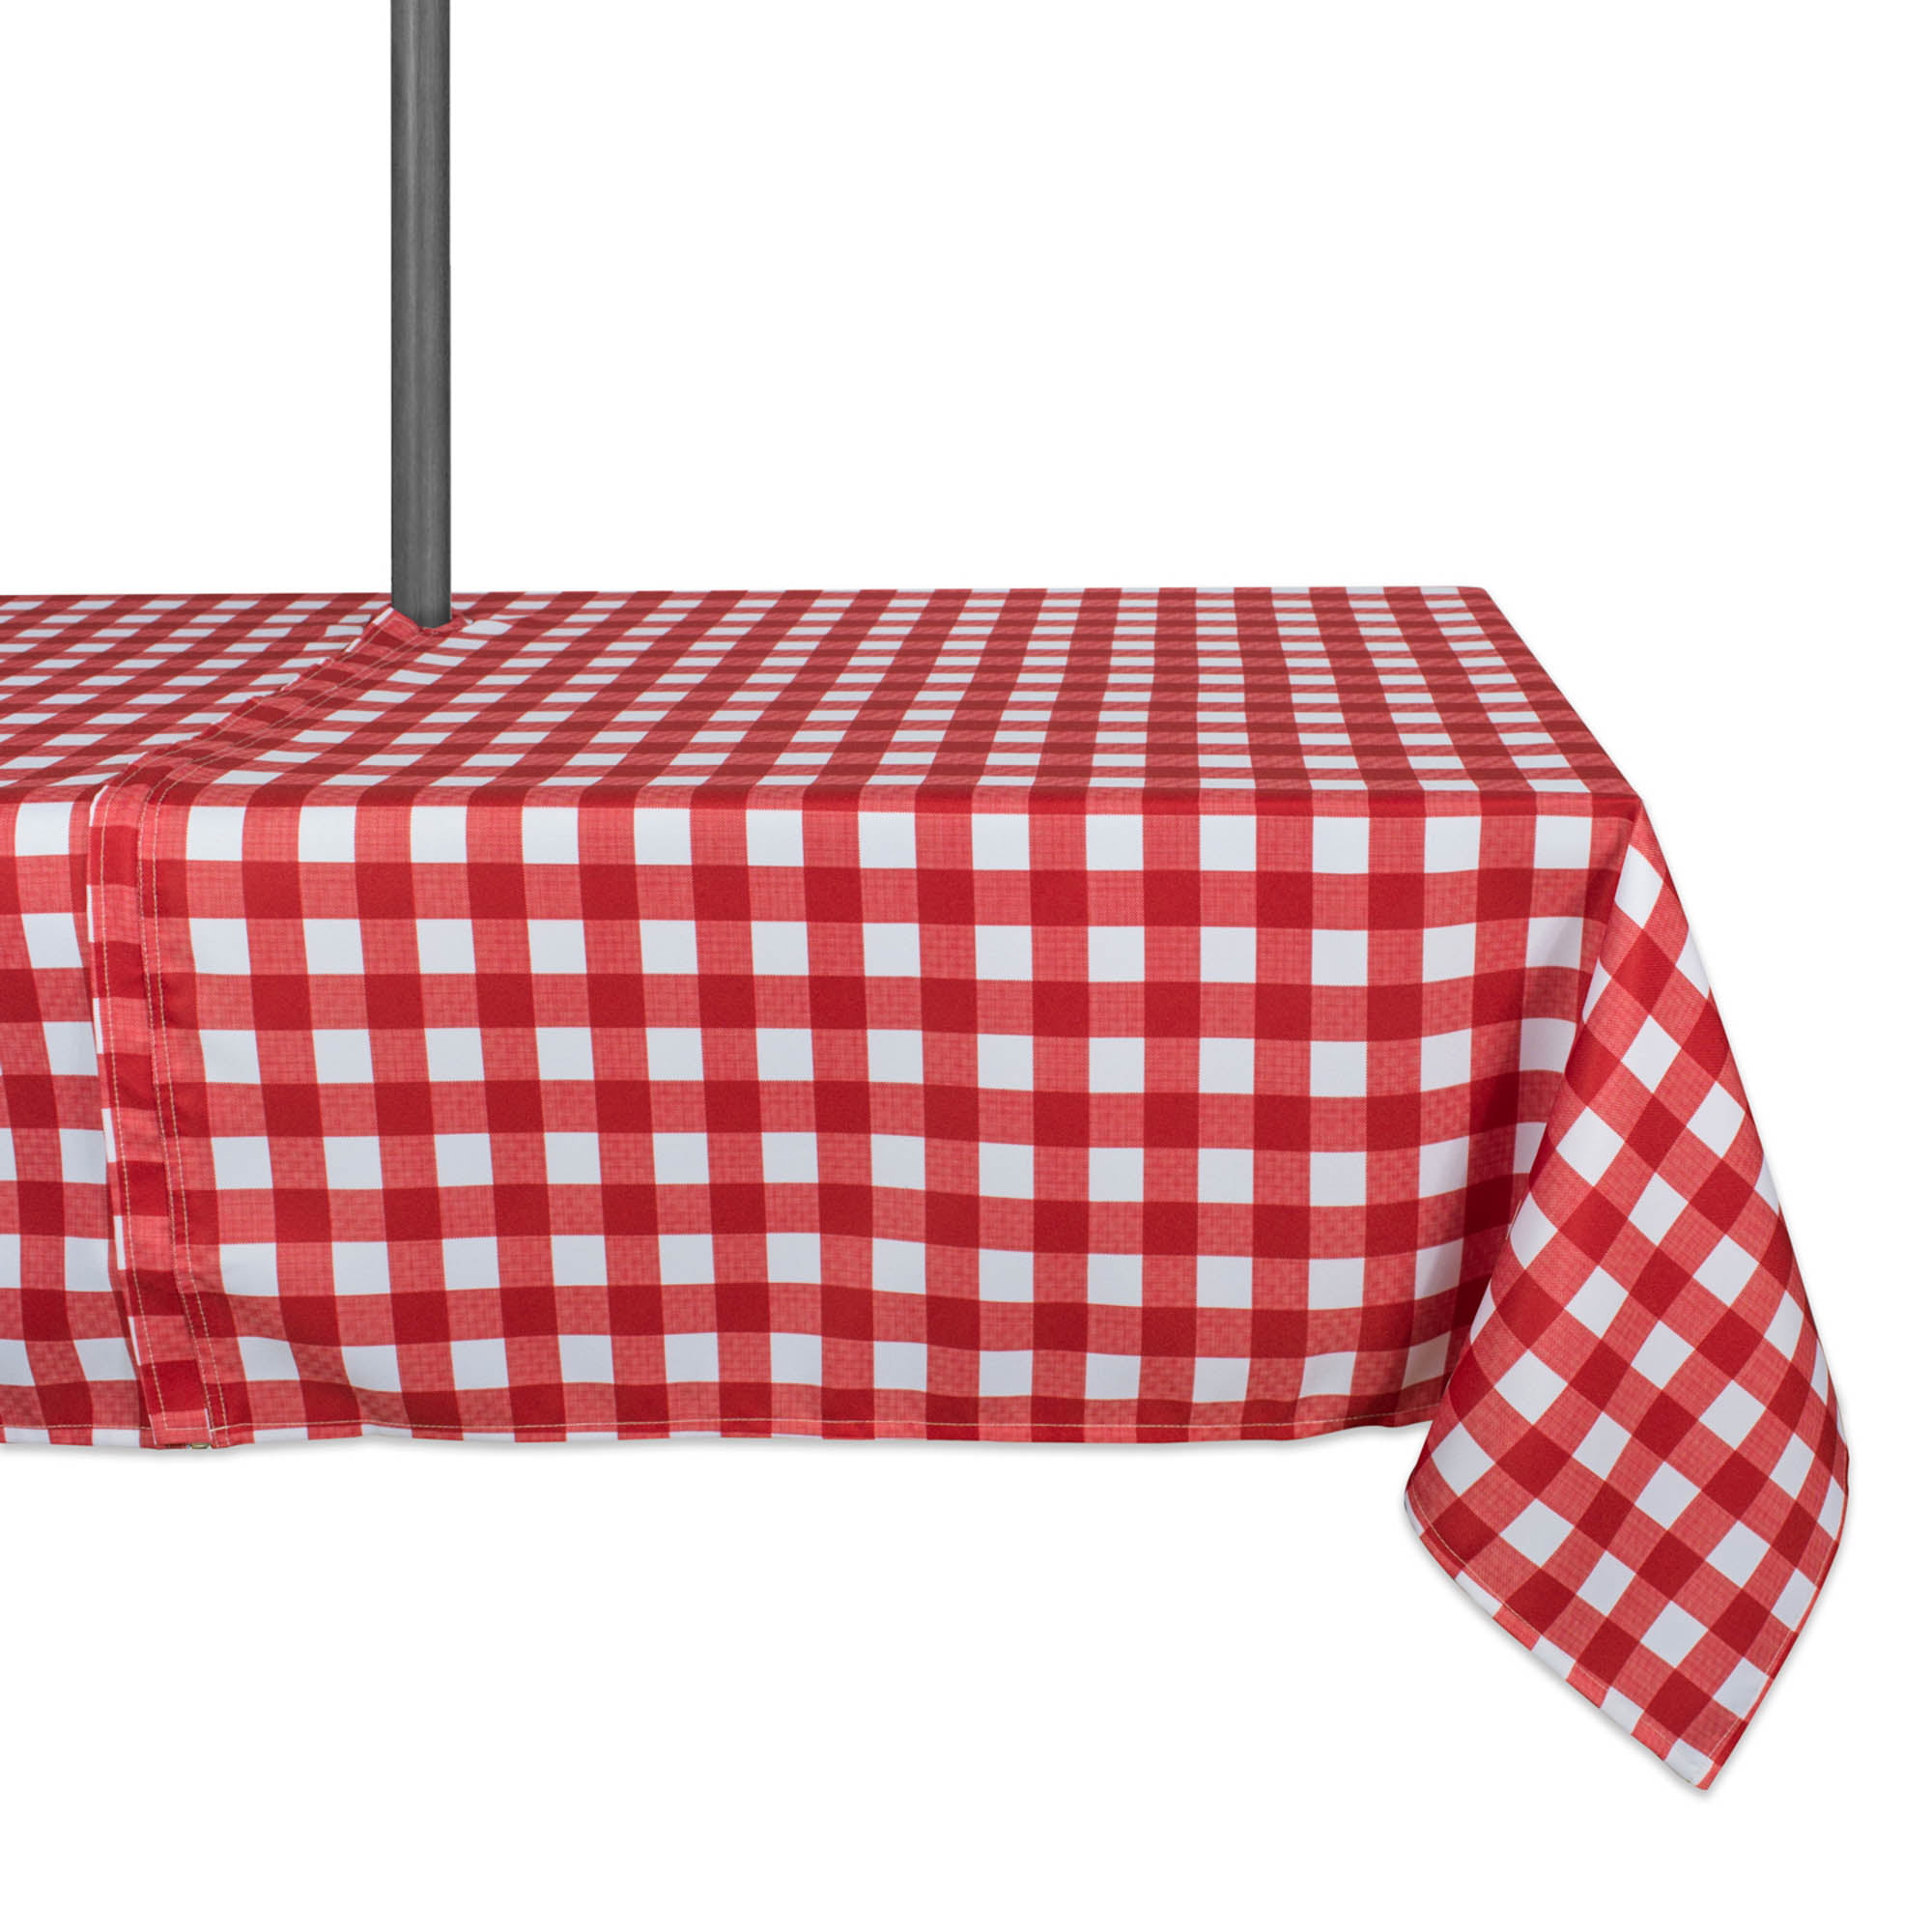 Details about   American Stars Zippered Elasticized Umbrella Table Cover  